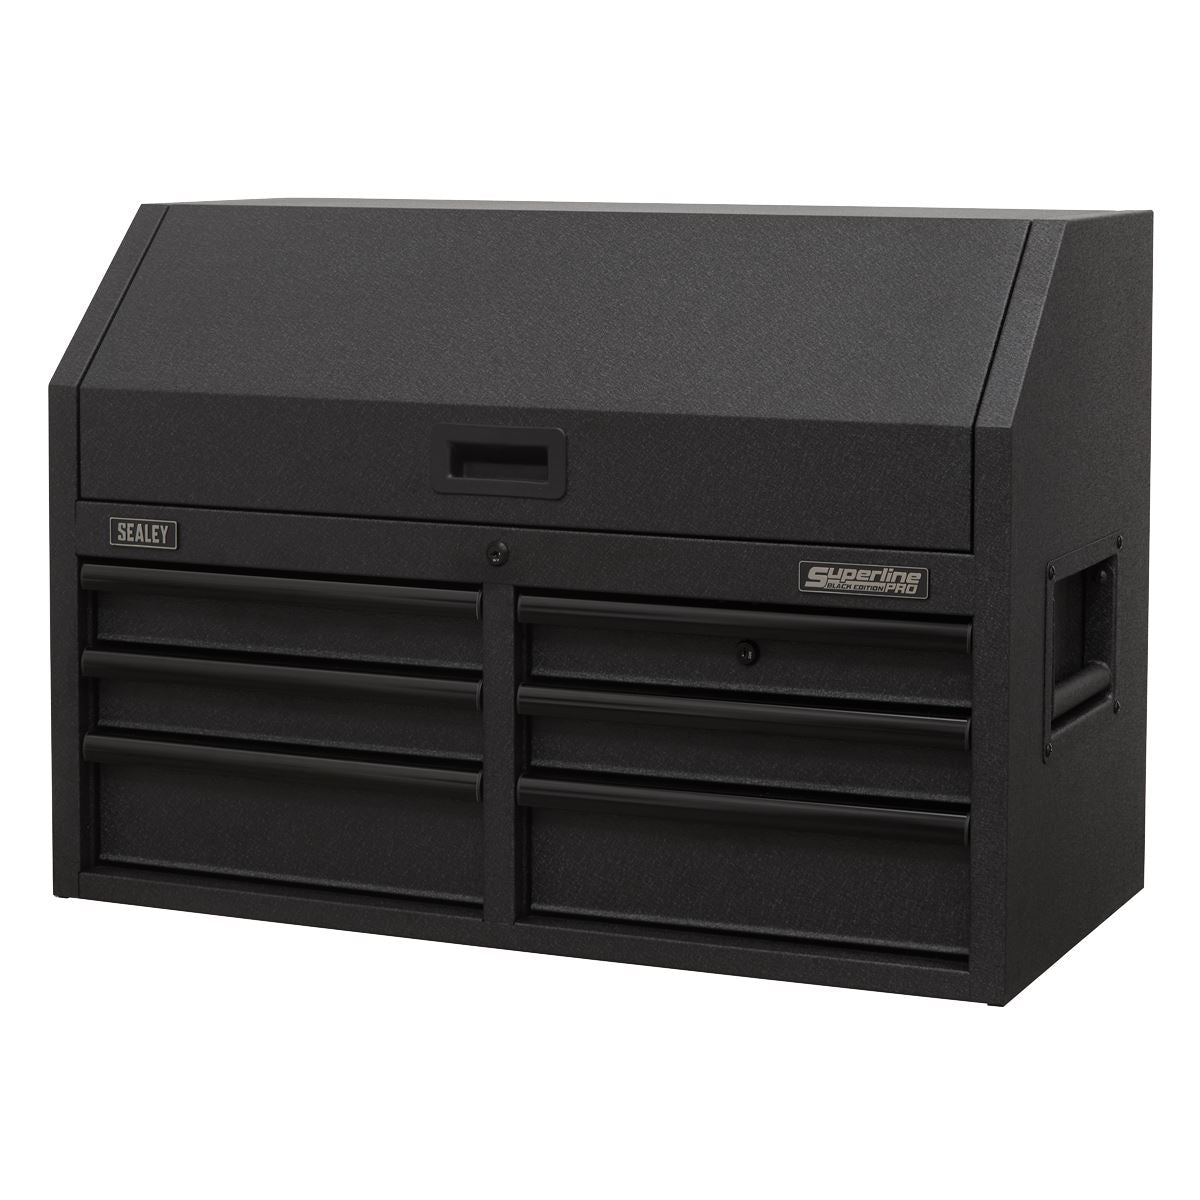 Sealey Superline Pro Topchest 6 Drawer 910mm with Soft Close Drawers & Power Strip